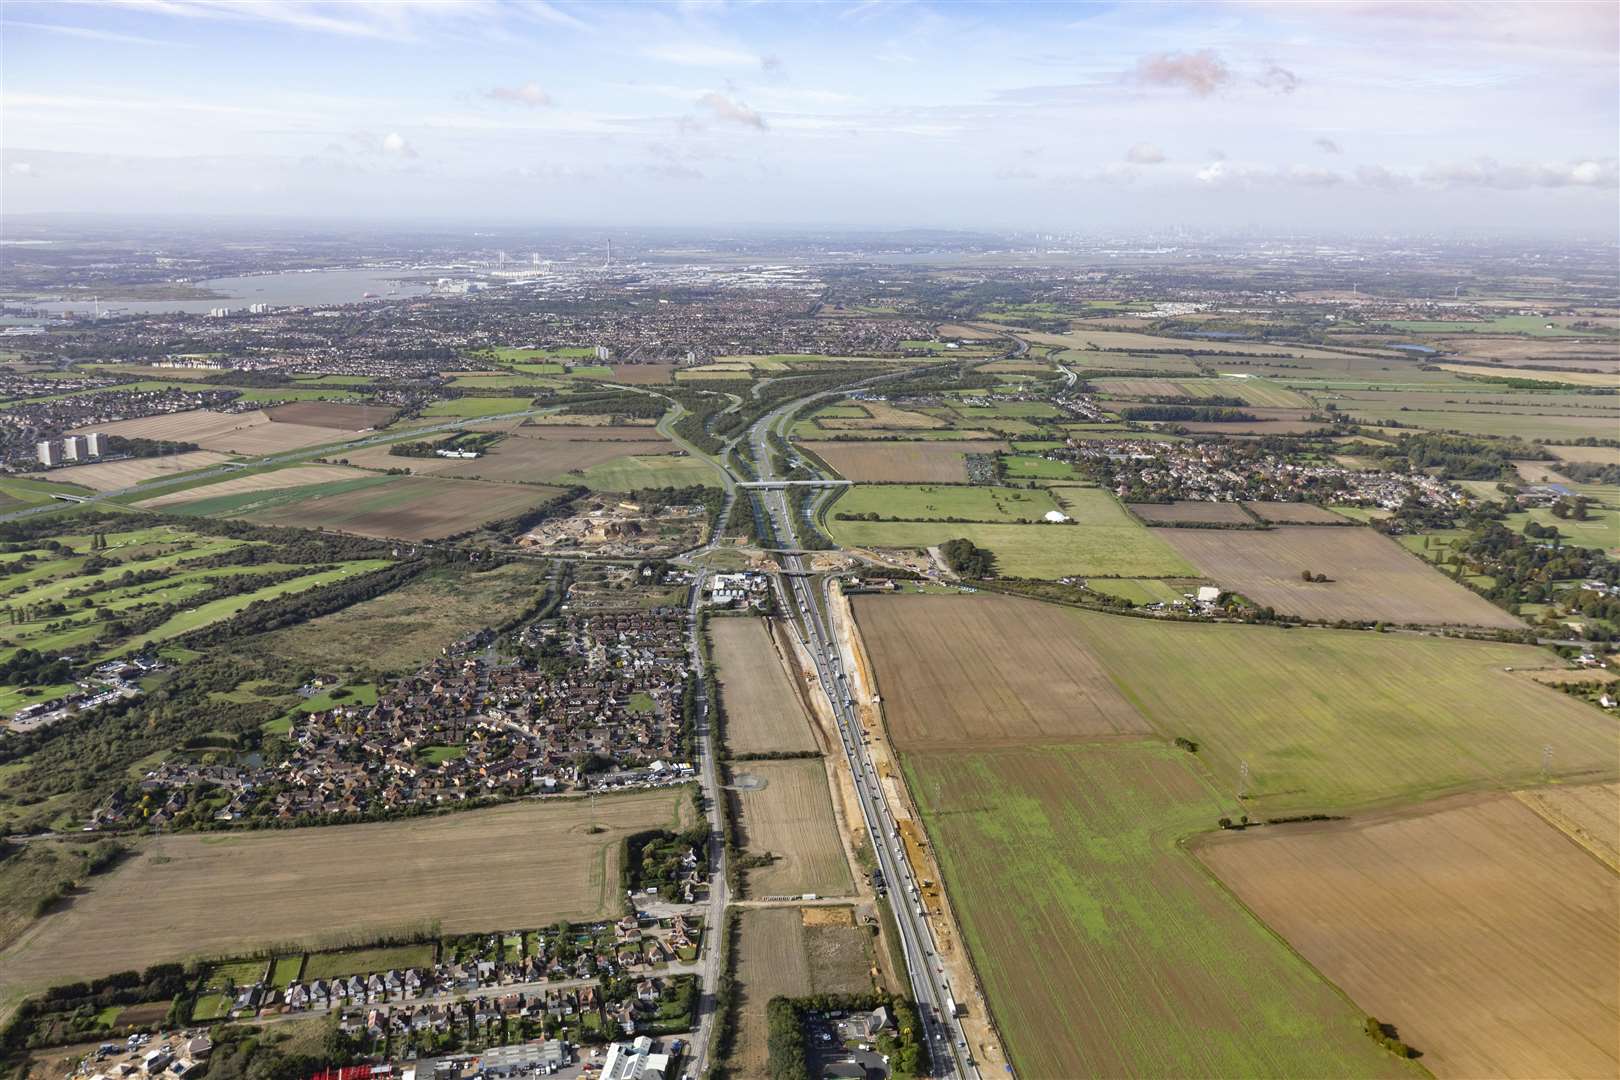 Design proposals for the A13 Orsett Cock roundabout and A1013 Stanford Road in Essex for the Lower Thames Crossing. Picture: Highways England